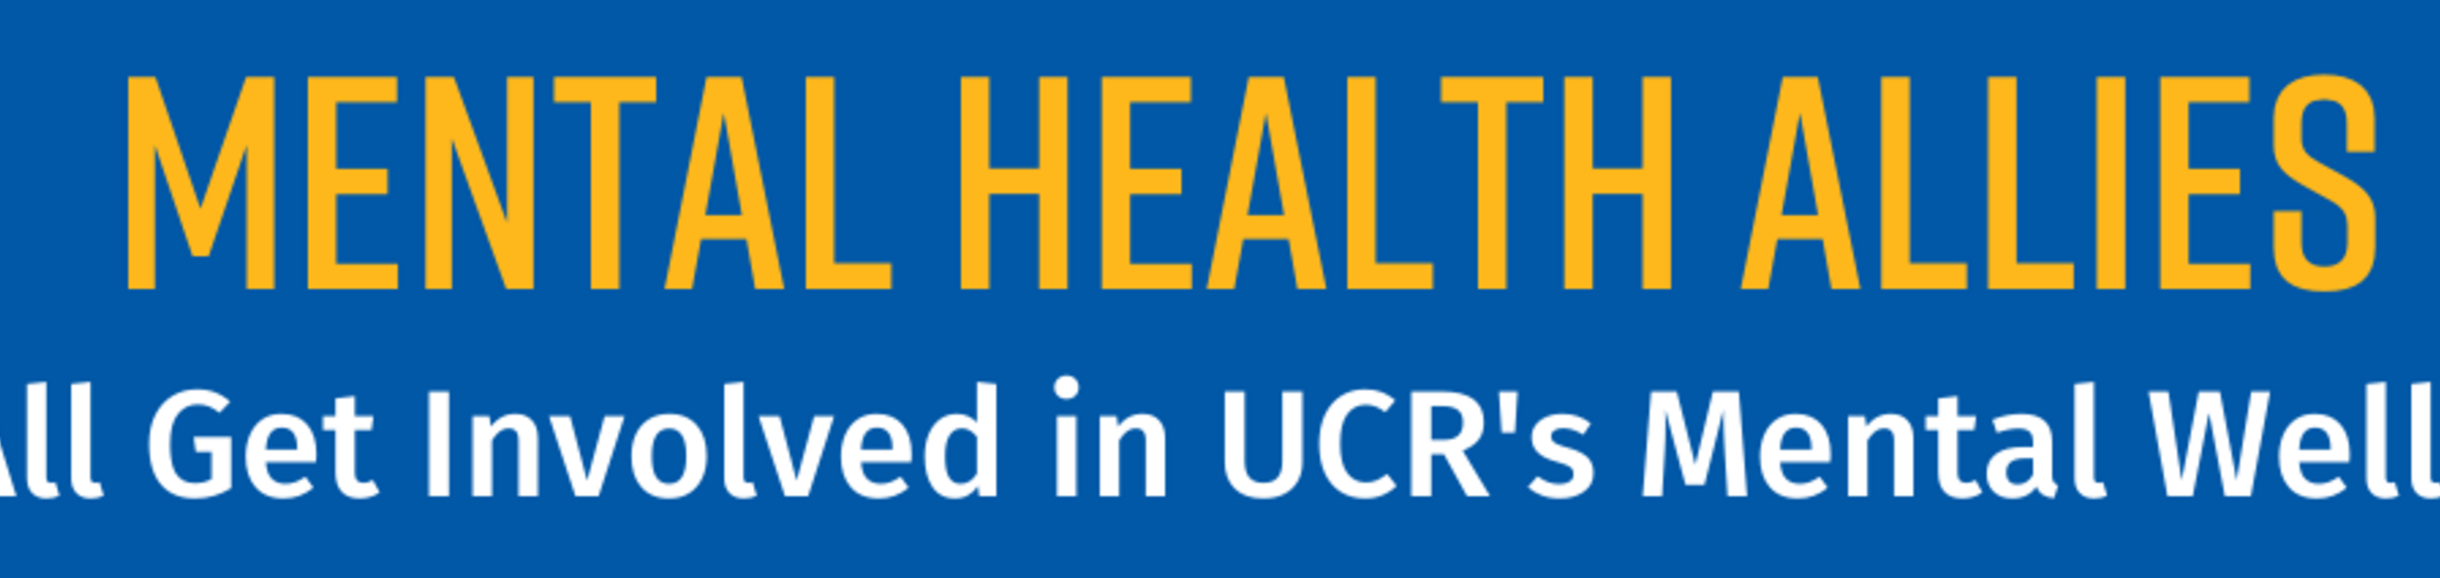 Blue Mental Health Allies Banner with yellow and white text